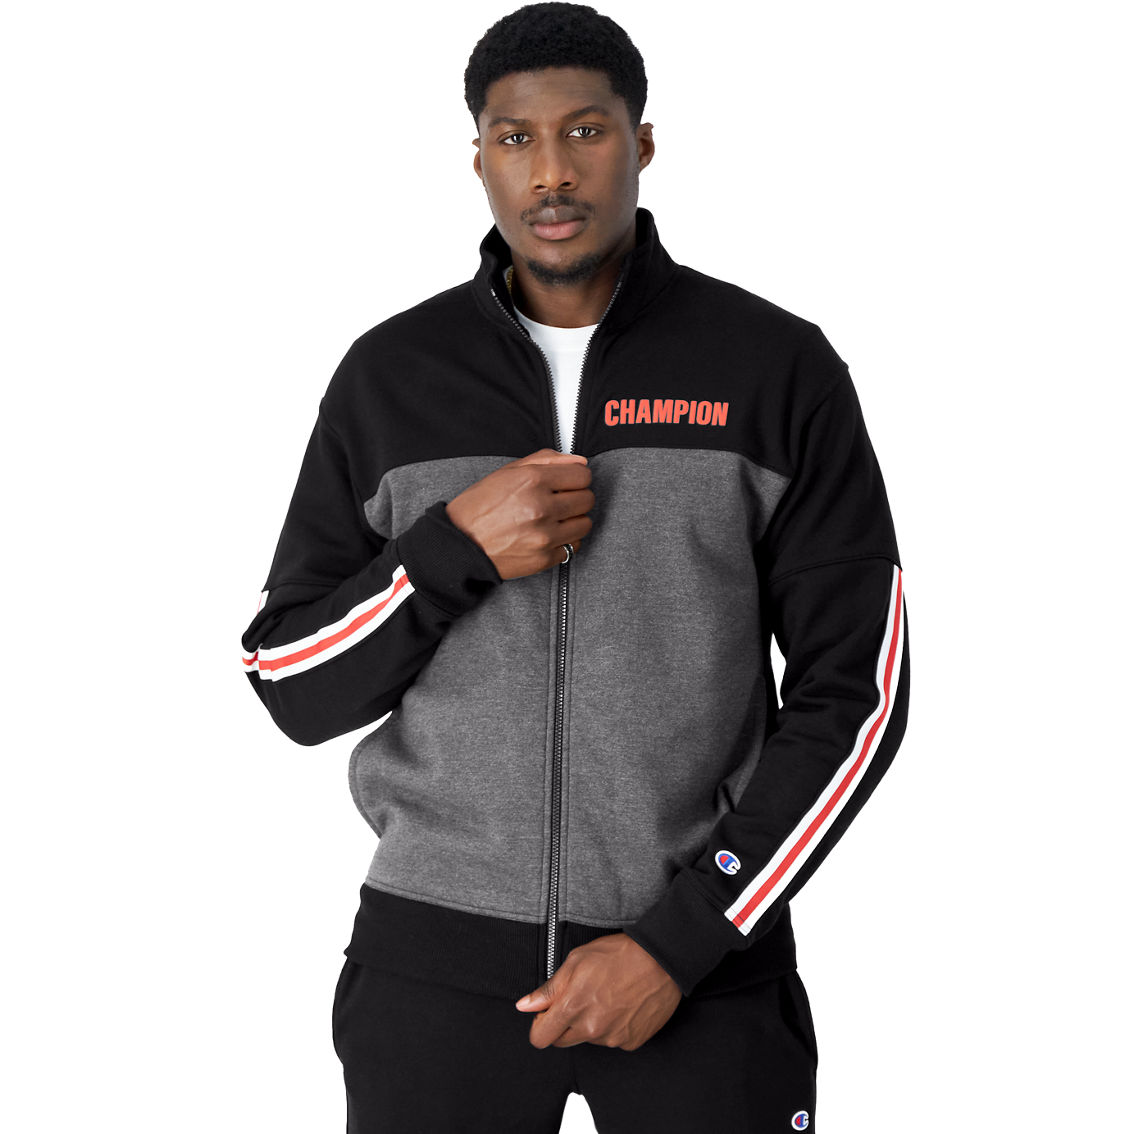 Champion Powerblend Taped Warm Up Jacket | Jackets | Clothing ...